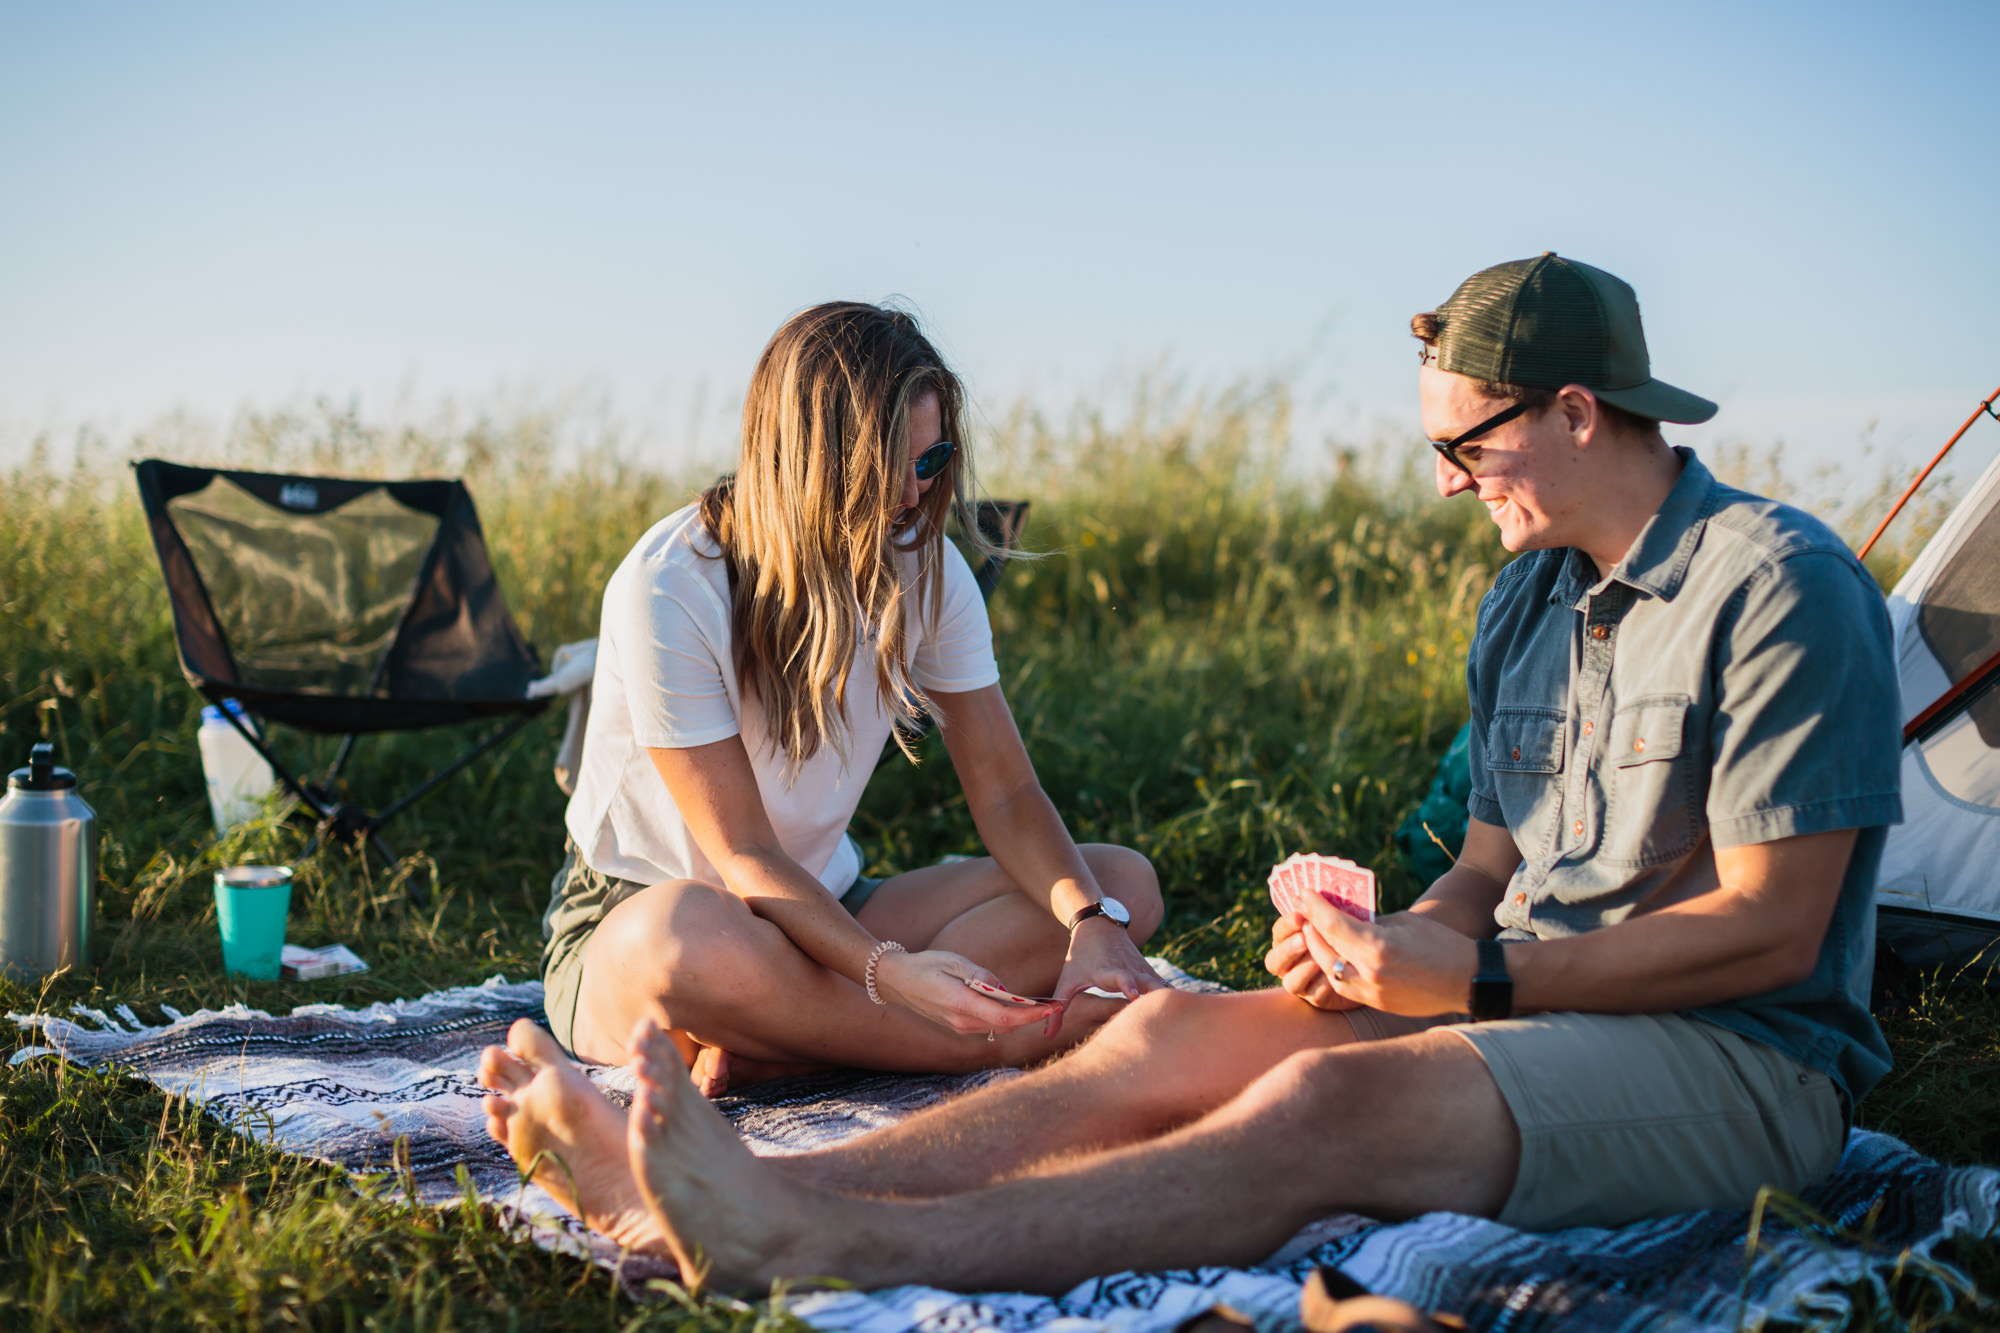 date night at max patch, girl with crossed legs and guy with stretched legs on blanket for date night on max patch, Nashville engagement, couples mountain, mountain engagement, couples camping, dog photography, Knoxville, couples hiking, camping with dog, North Carolina hiking, summer engagement photos, Tennessee Photography, Tennessee Photographer, Tennessee Photos, Tennessee Engagement Photography, Tennessee Engagement Photos, Tennessee Engagement Photographer, Tennessee Portrait Photographer, Nashville Engagement Photographer, Nashville Engagement Photos, Knoxville Engagement, Nashville Lifestyle Photographer, Nashville Lifestyle Photography, Nashville Lifestyle Photos, Creative Portraits